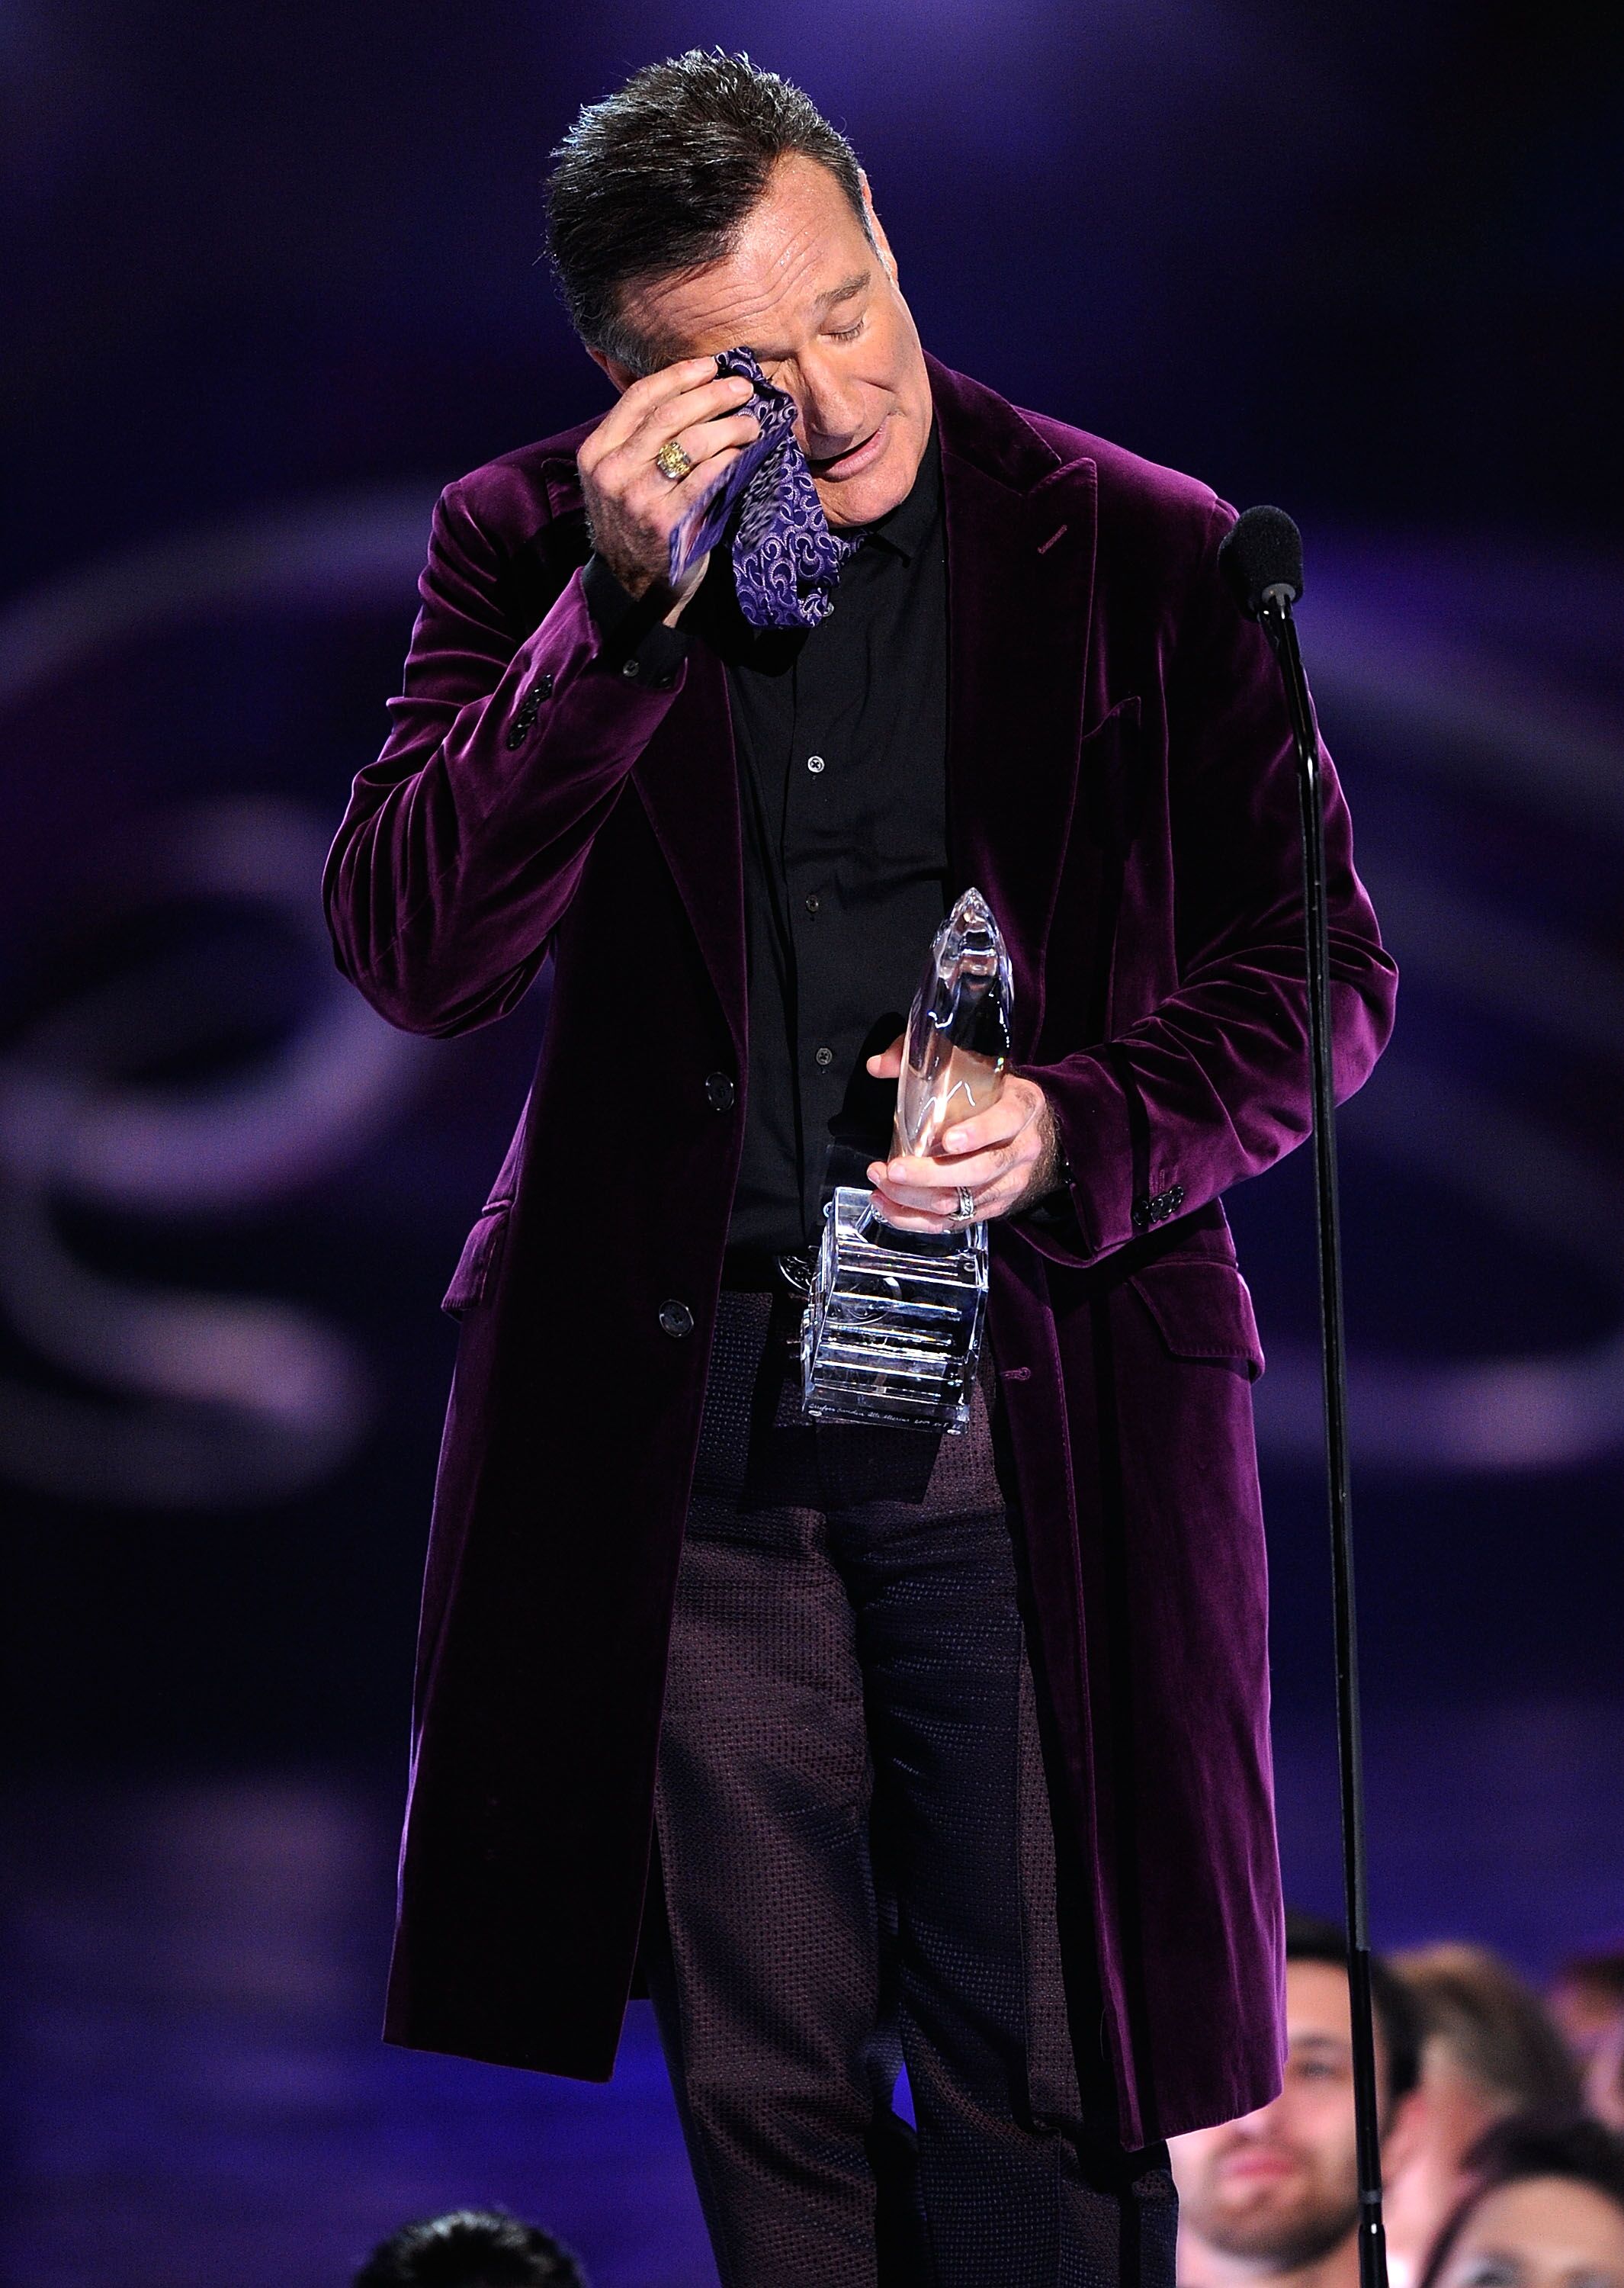  Robin Williams accepts the Favorite Scene Stealing Guest Star award. | Source: Getty Images